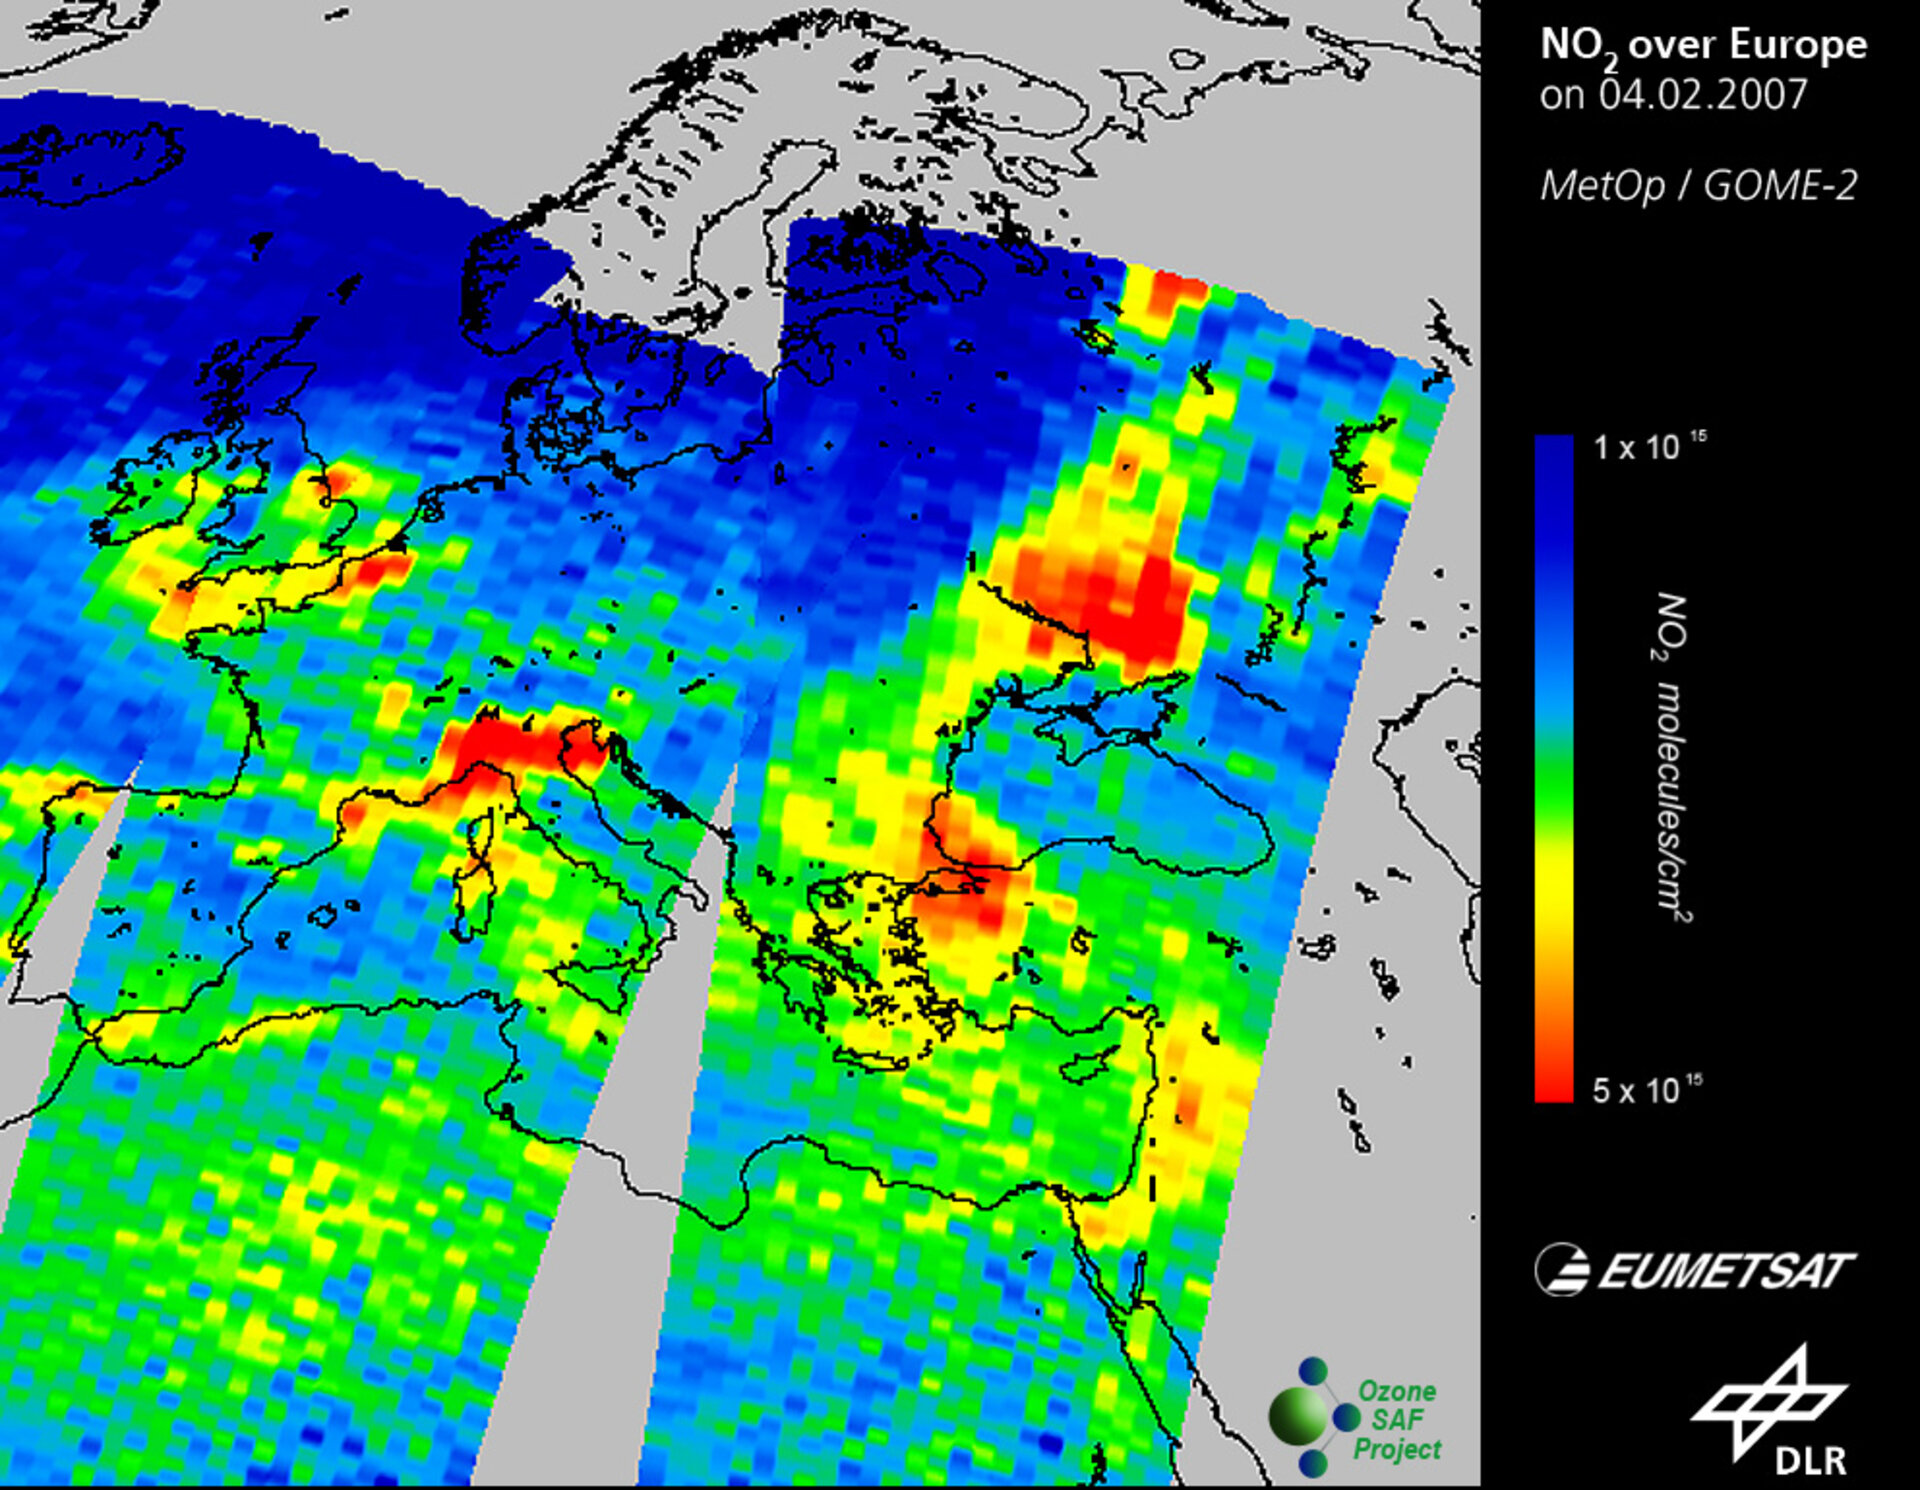 Total nitrogen oxide over Europe measured by GOME-2